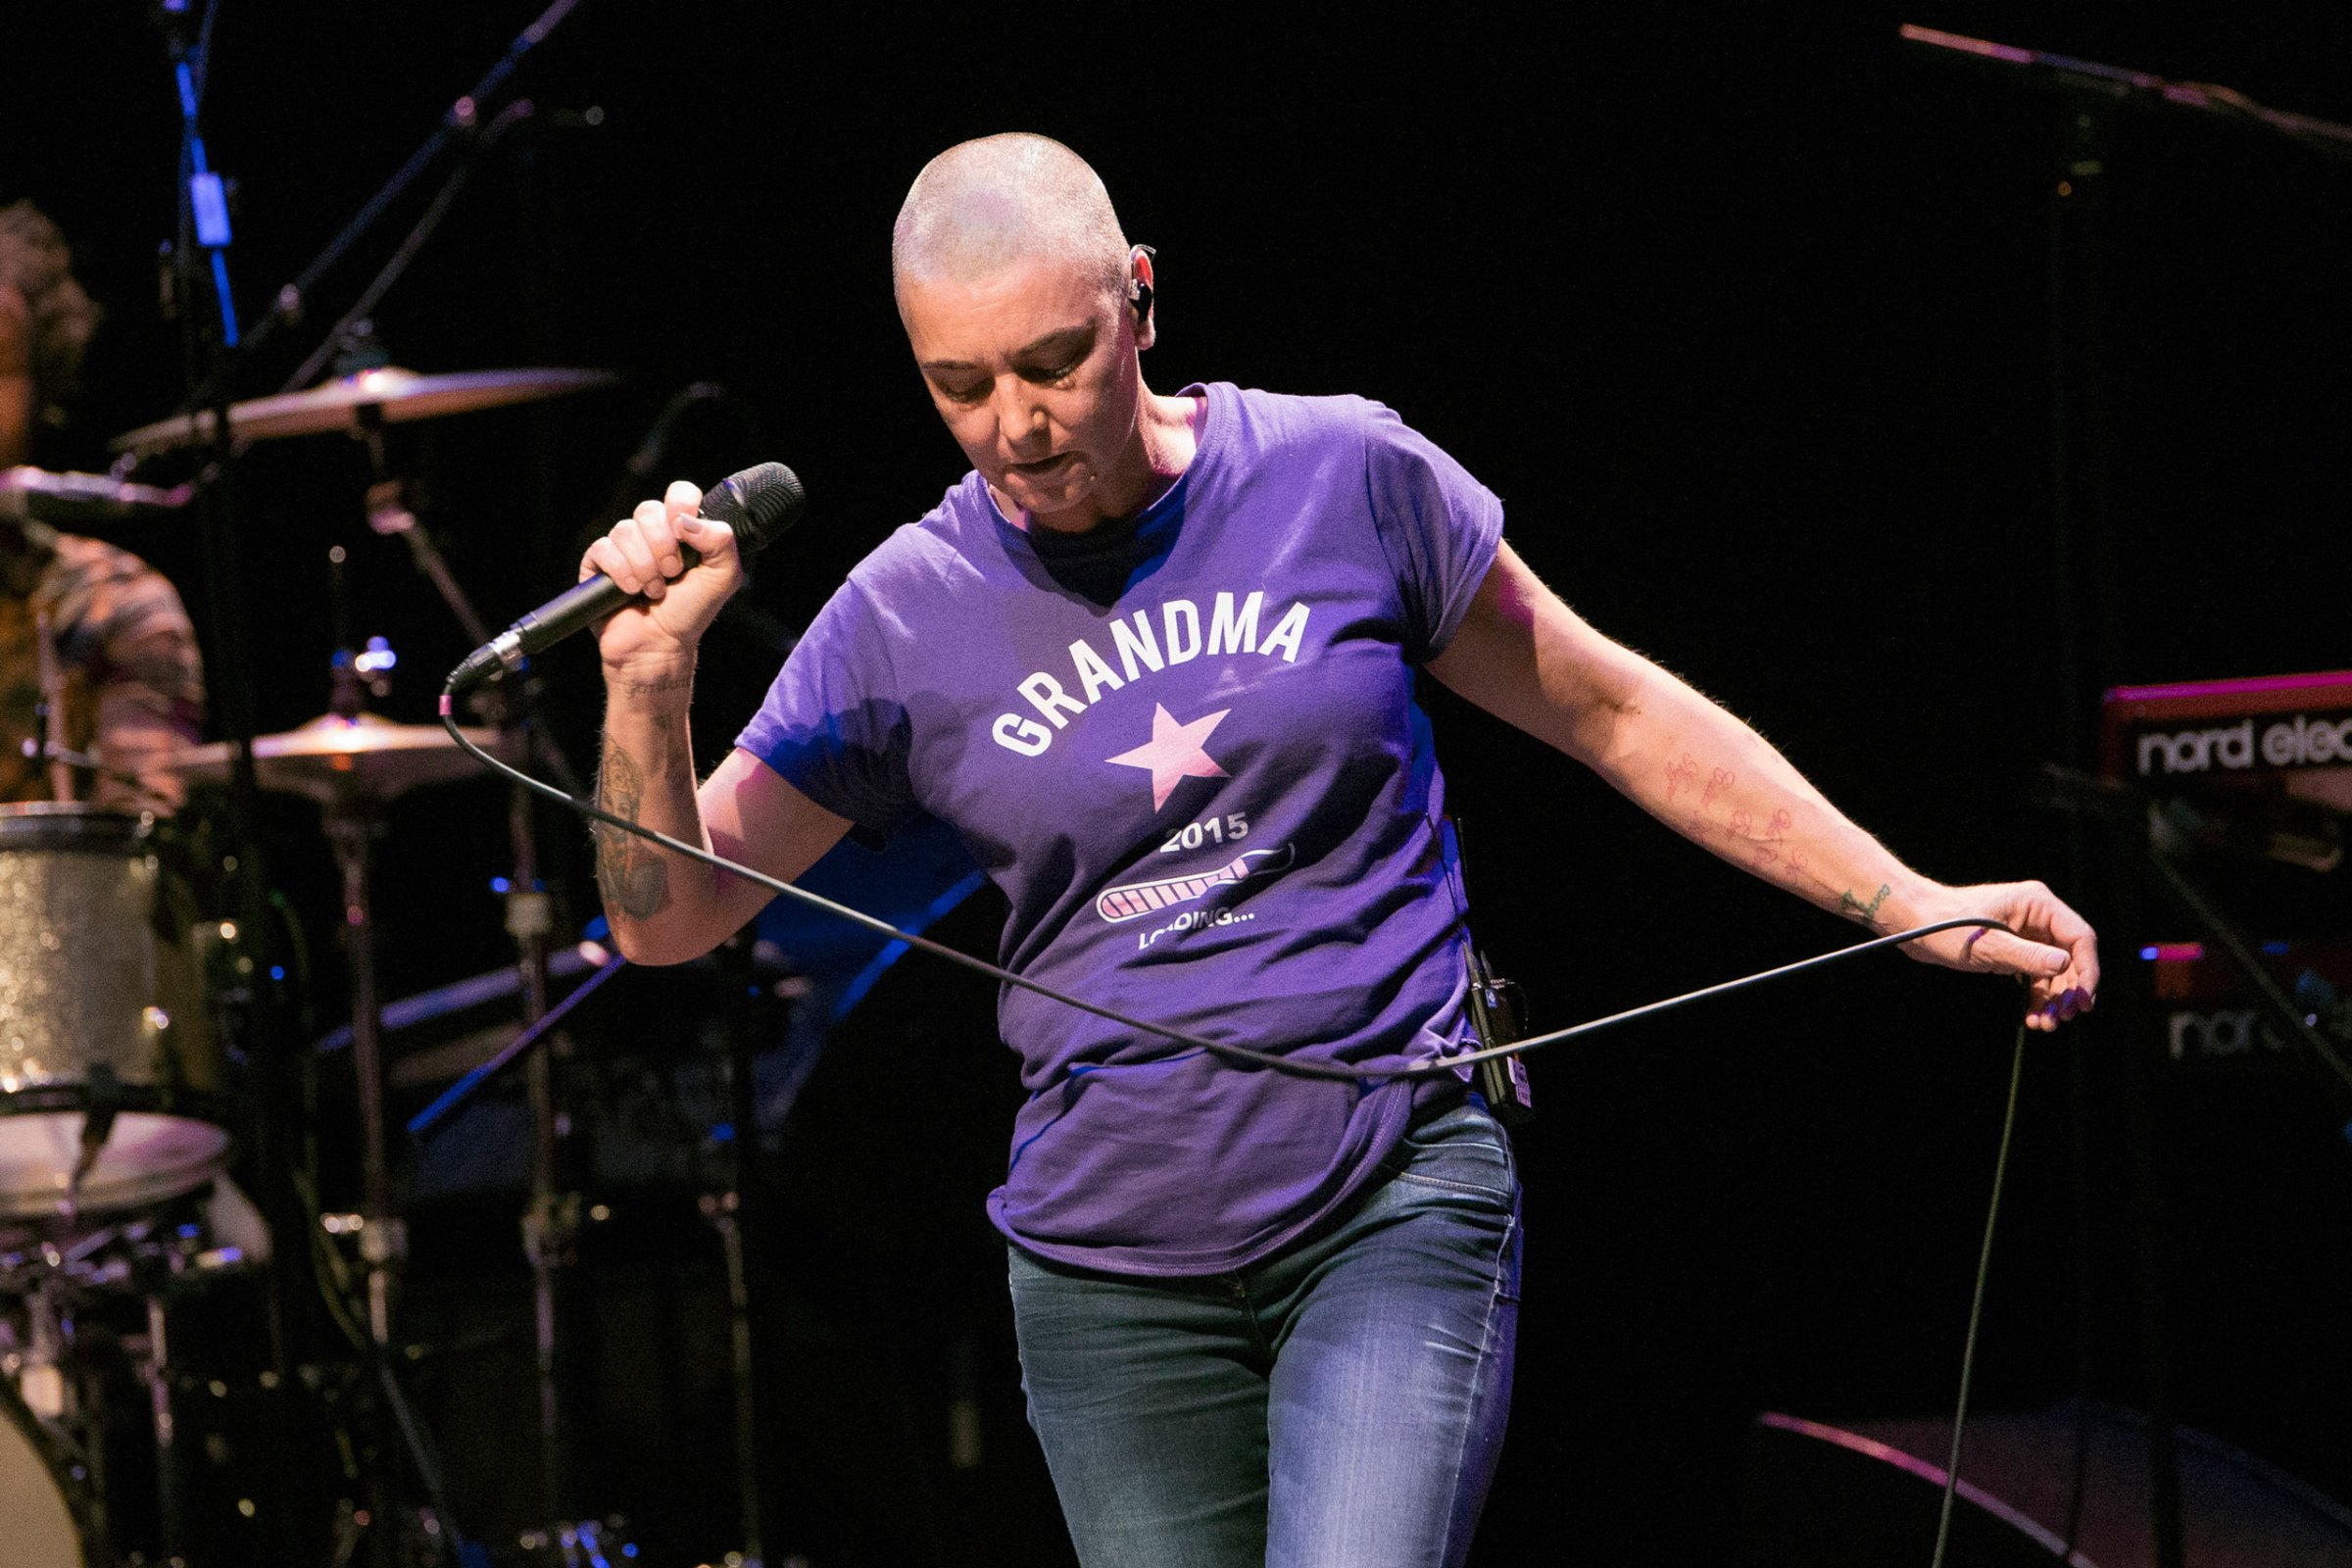 LONDON, ENGLAND - APRIL 13: Sinead O'Connor performs on stage at Barbican Centre on April 13, 2015 in London, United Kingdom (Photo by Rob Ball/Redferns via Getty Images)